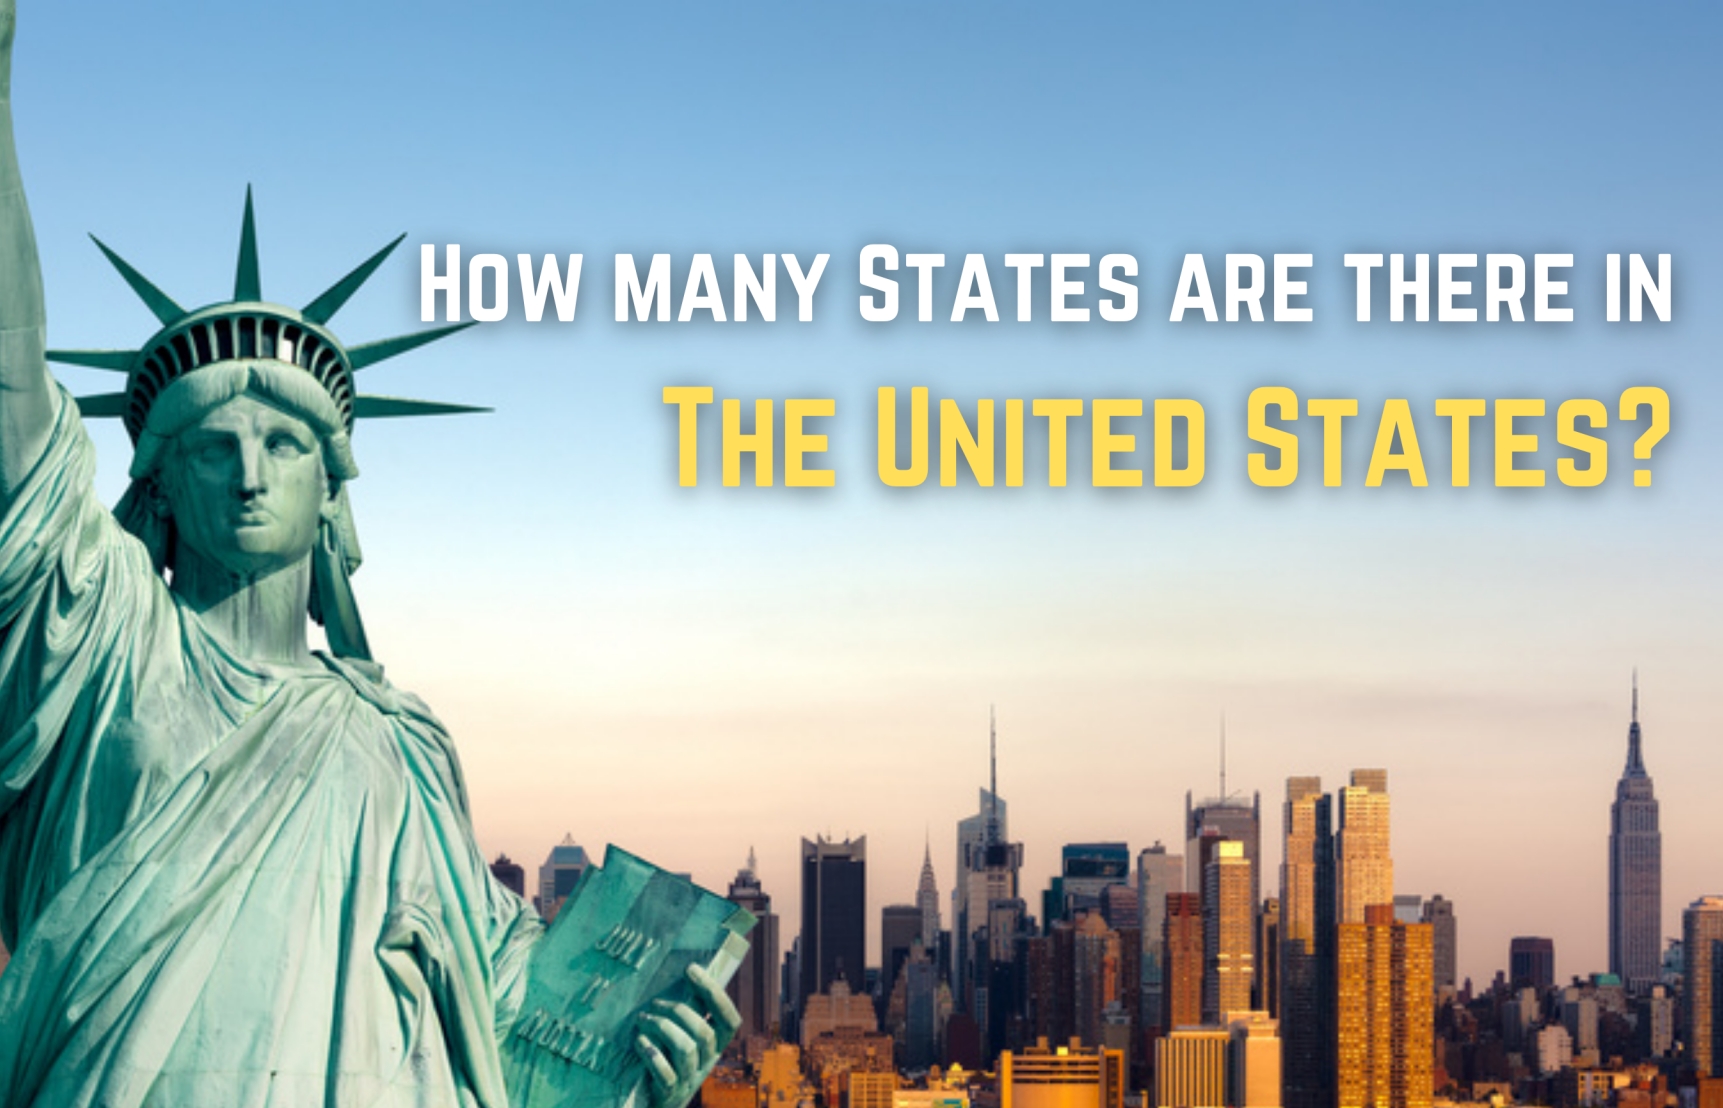 How Many States Are There In The United States - 50 or 52?